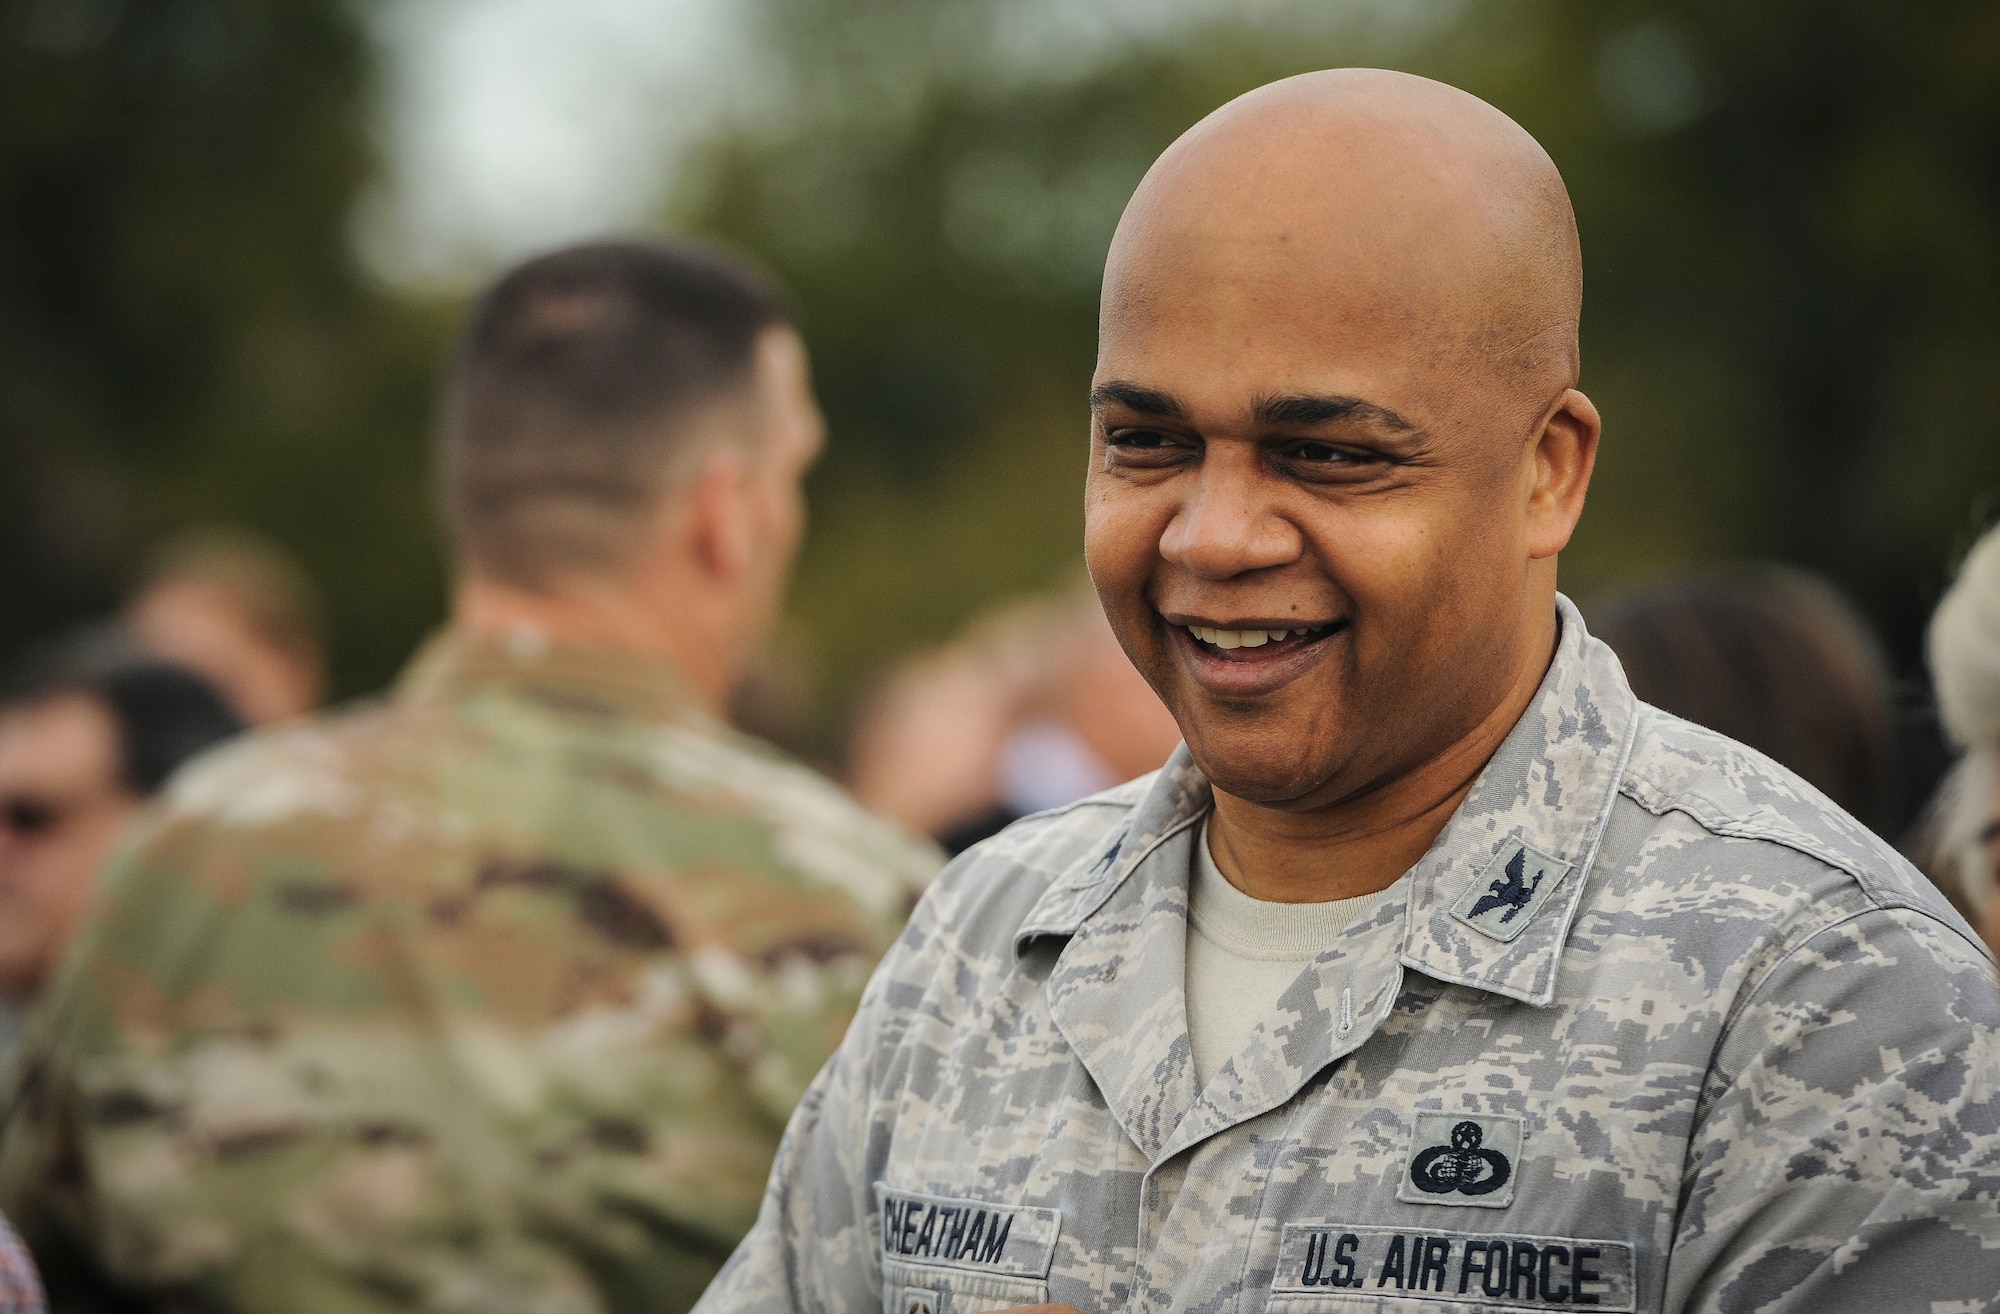 Col. Ronald Cheatham, Air Combat Command director of manpower, personnel and services, laughs with a colleague after a resiliency walk on Joint Base Langley-Eustis, Virginia, Oct. 25, 2019. The commander of ACC directed all of his staff members to get out of the office, move and connect as part of an effort to improve morale and sharpen resilience. (U.S. Air Force photo by Tech. Sgt. Nick Wilson)